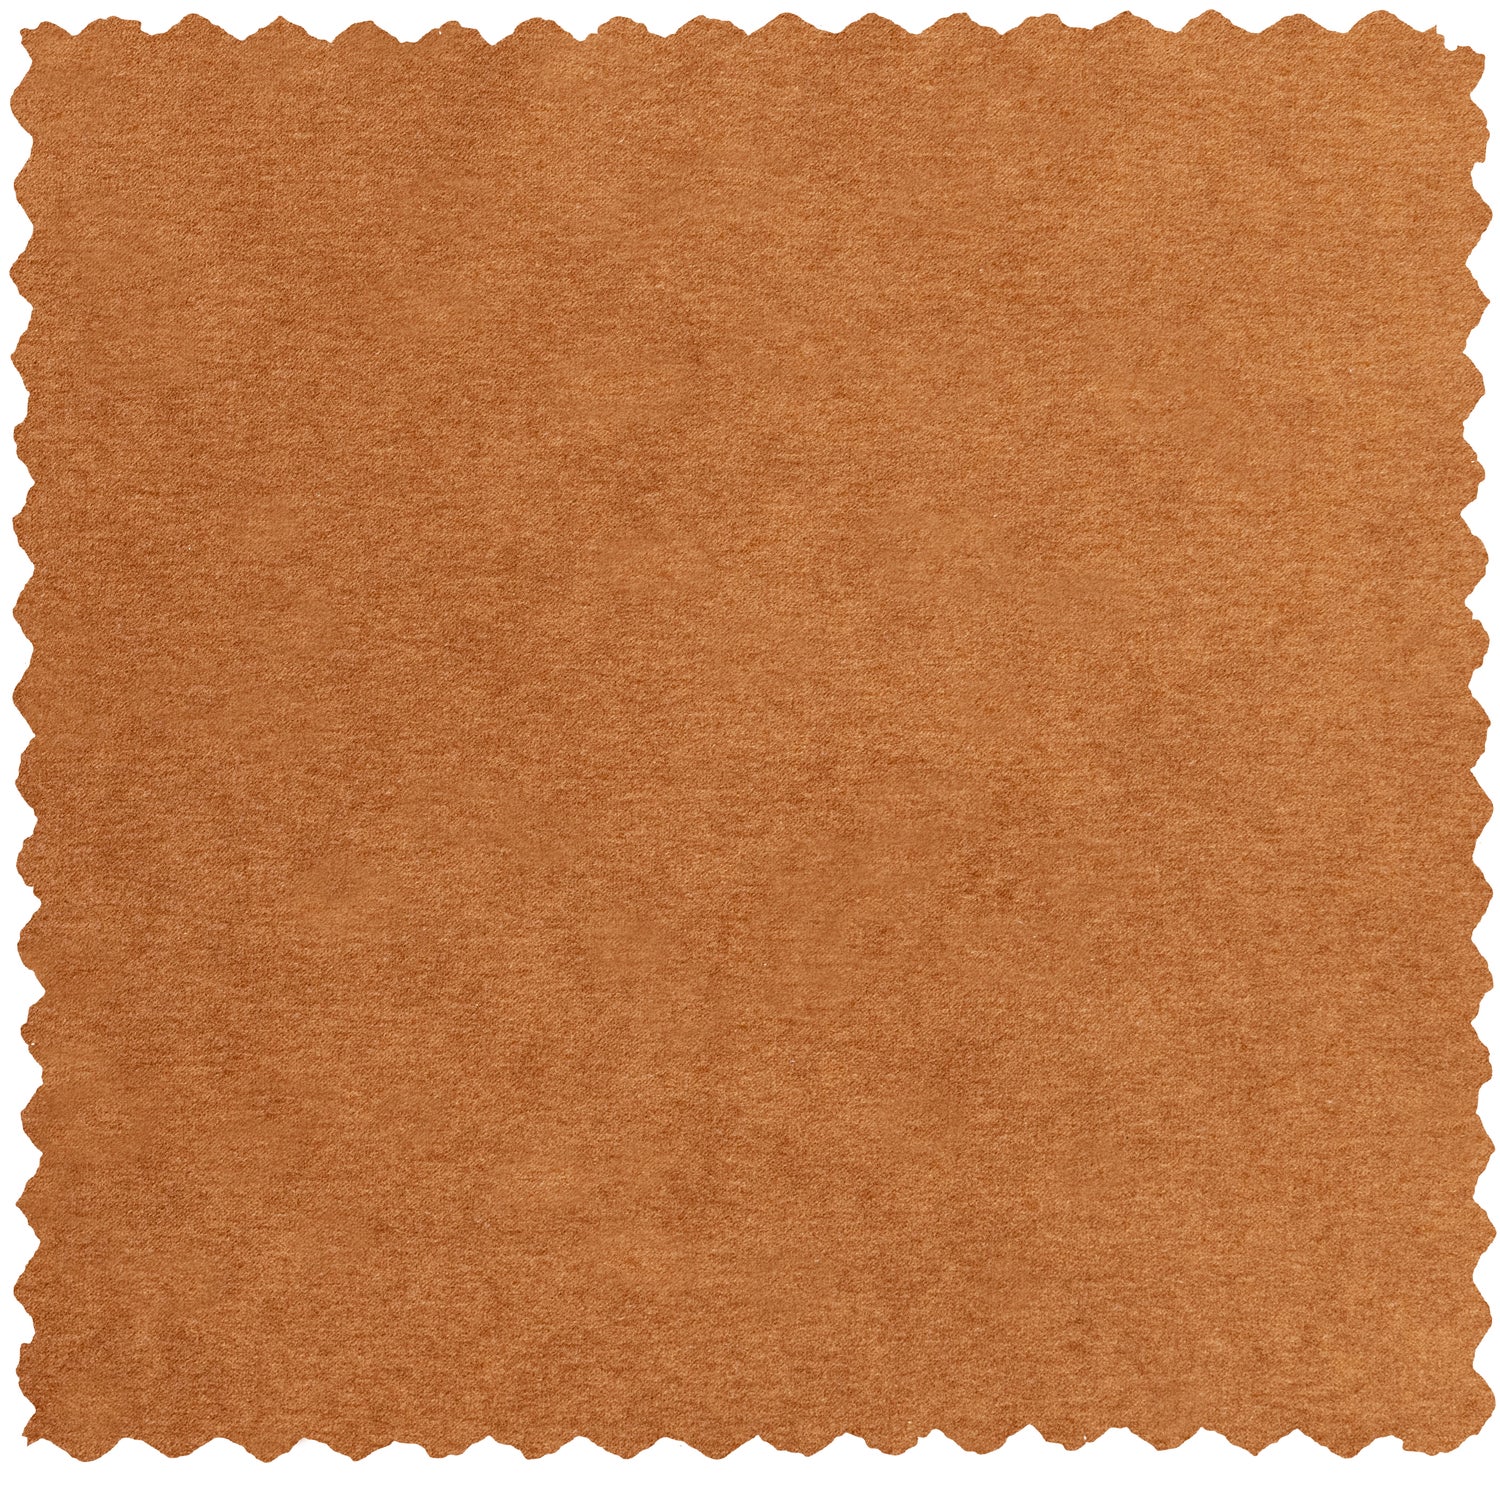 OPAL_409_CINNAMON_LOMA_WASHED_VELVET.jpg?auto=webp&format=png&width=2000&height=2000